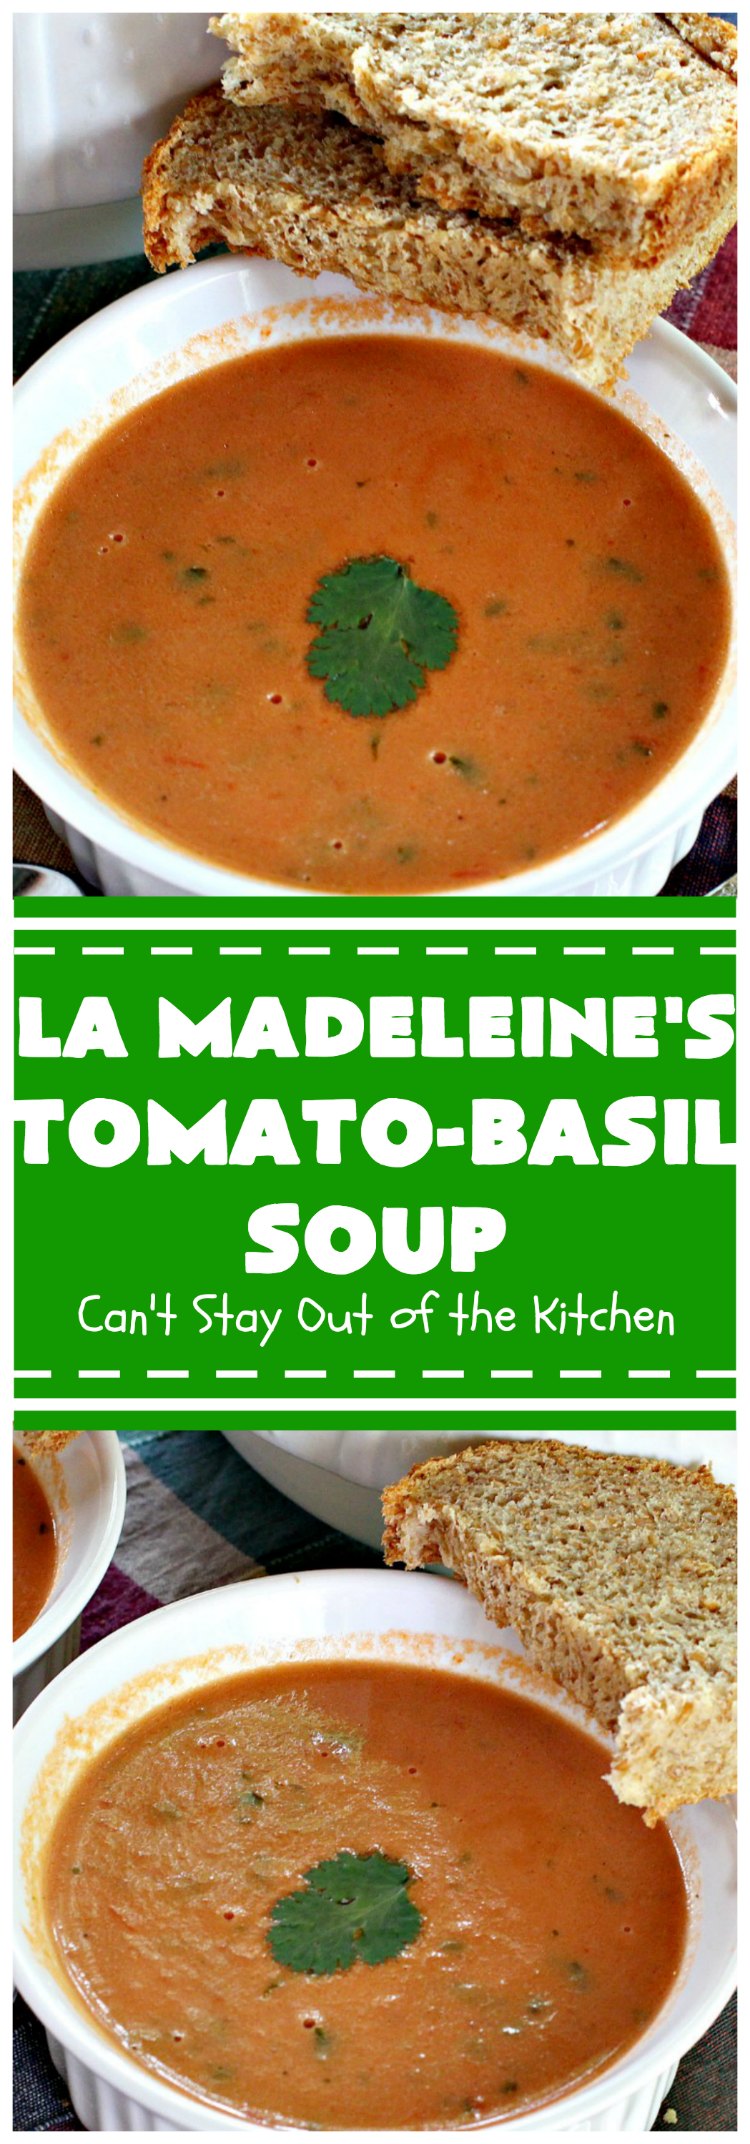 LaMadeleine's Tomato-Basil Soup | Can't Stay Out of the Kitchen